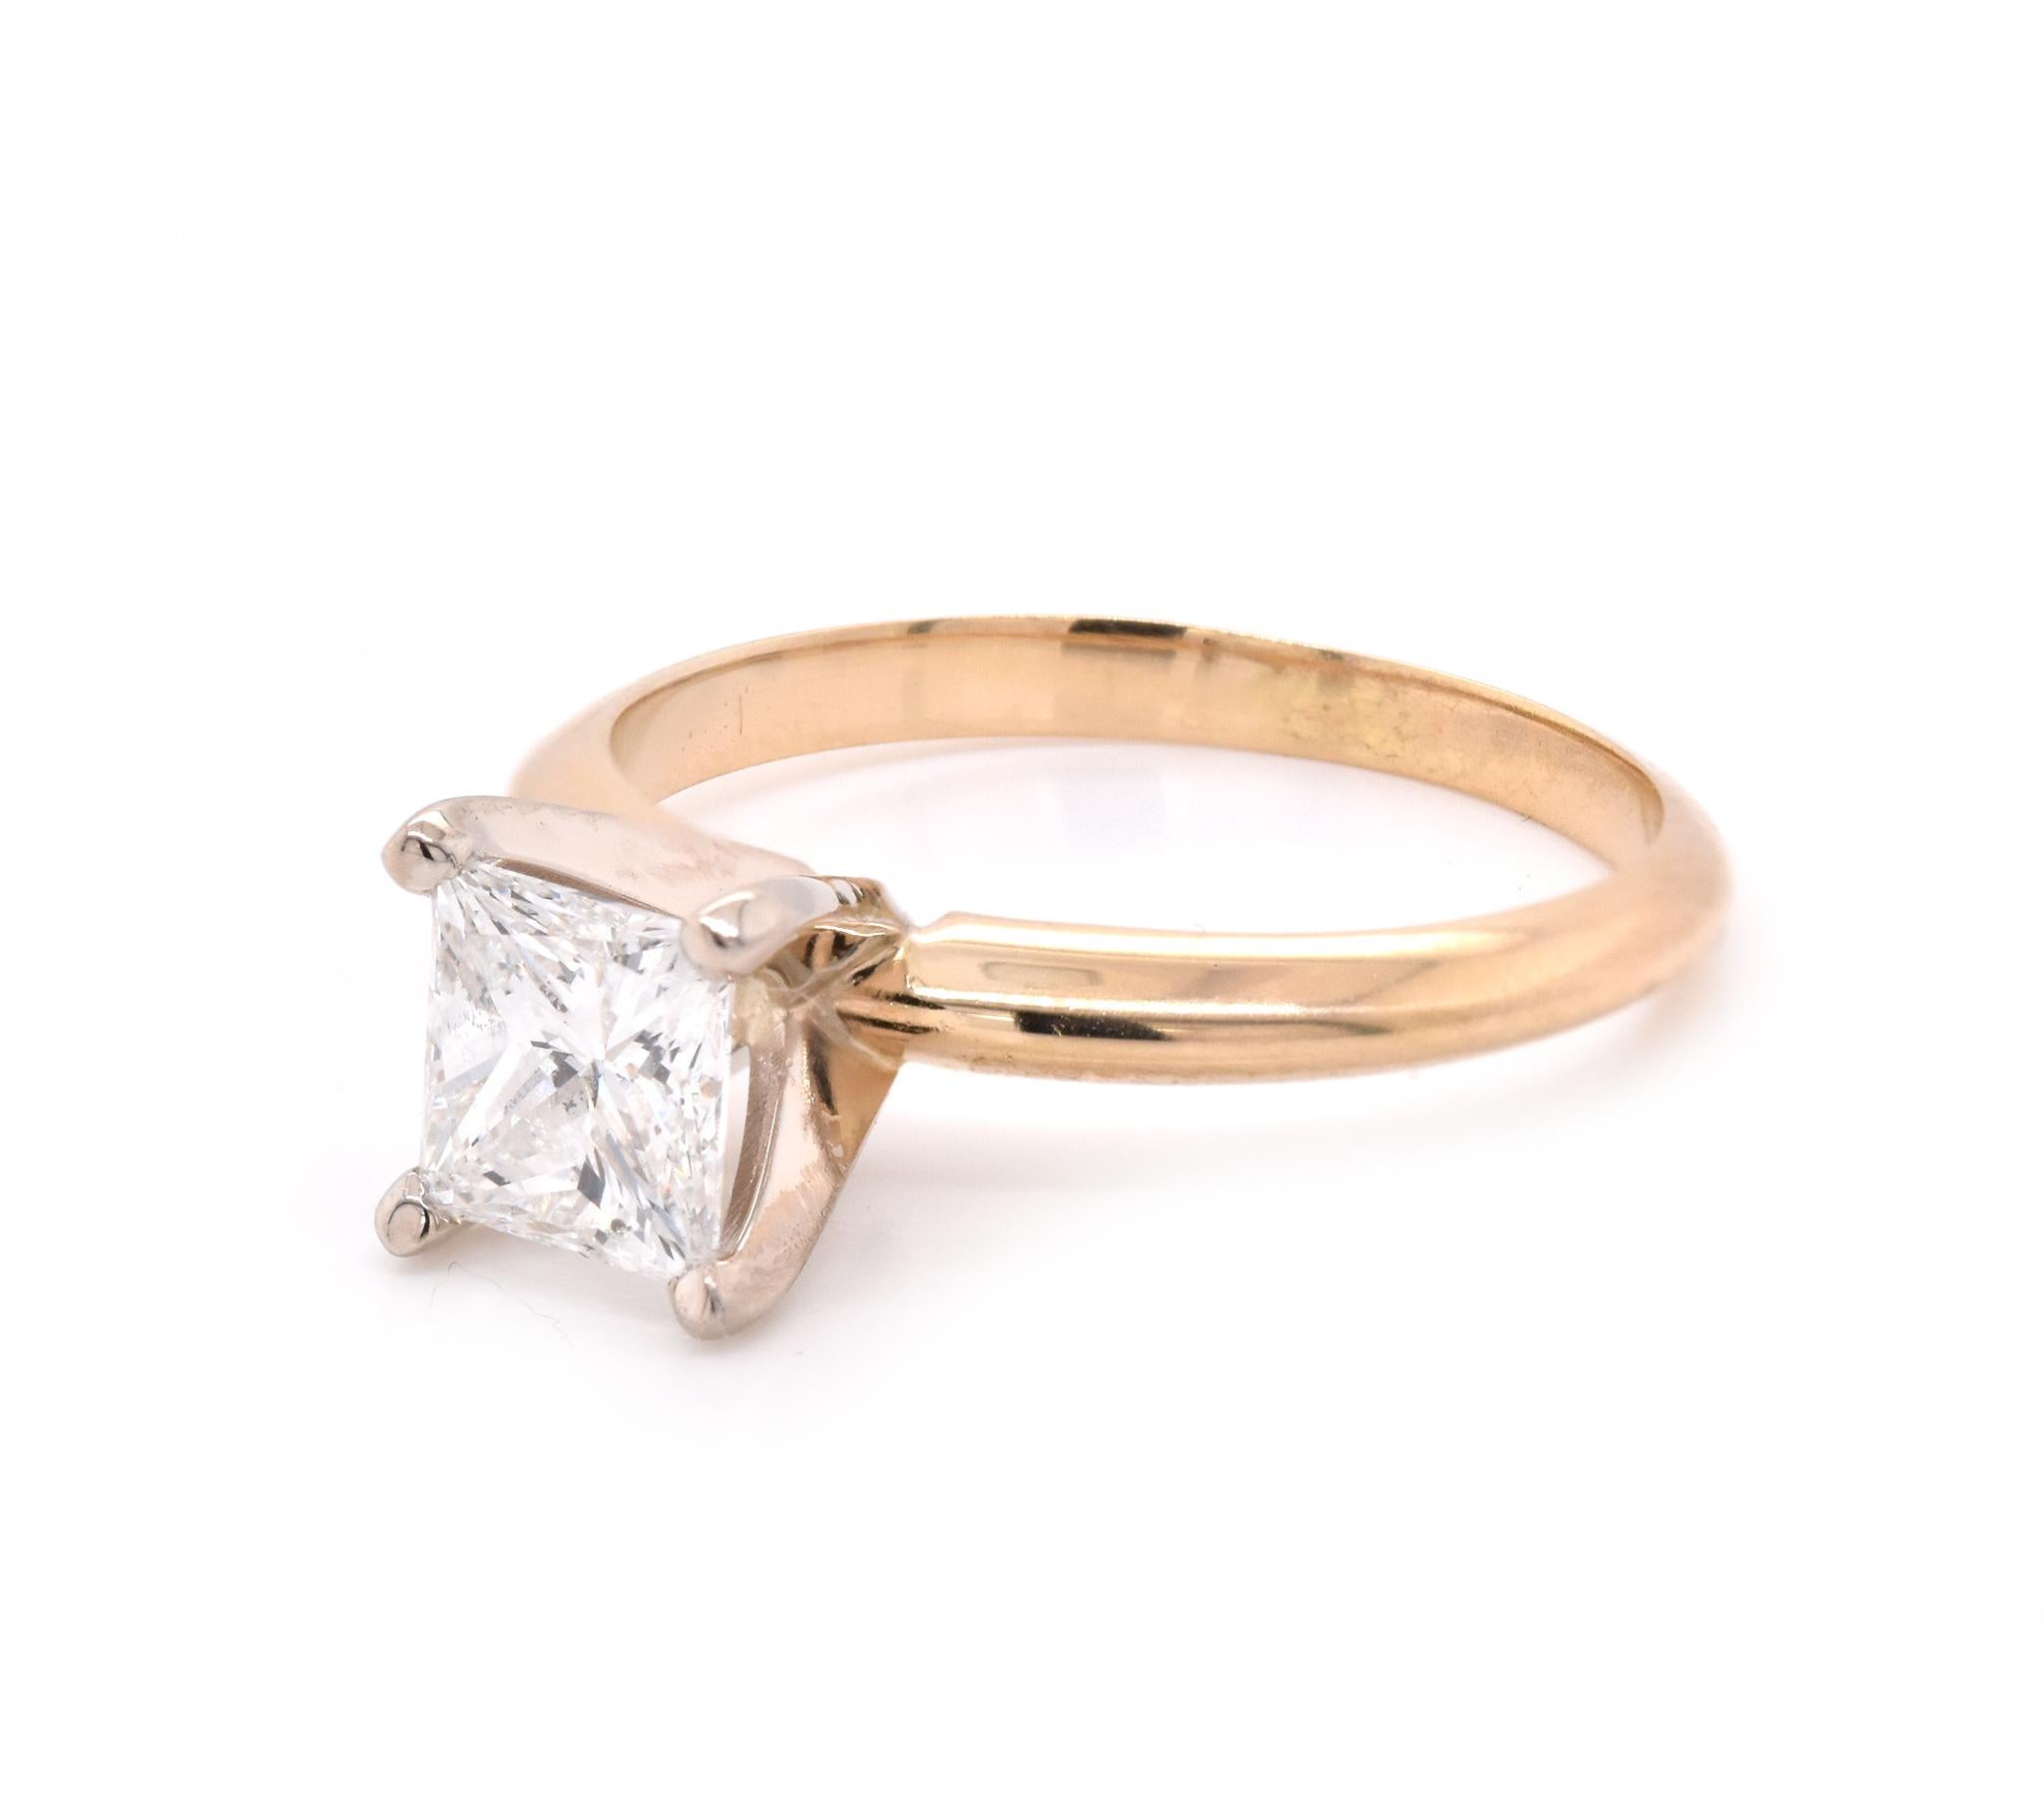 yellow gold solitaire engagement rings